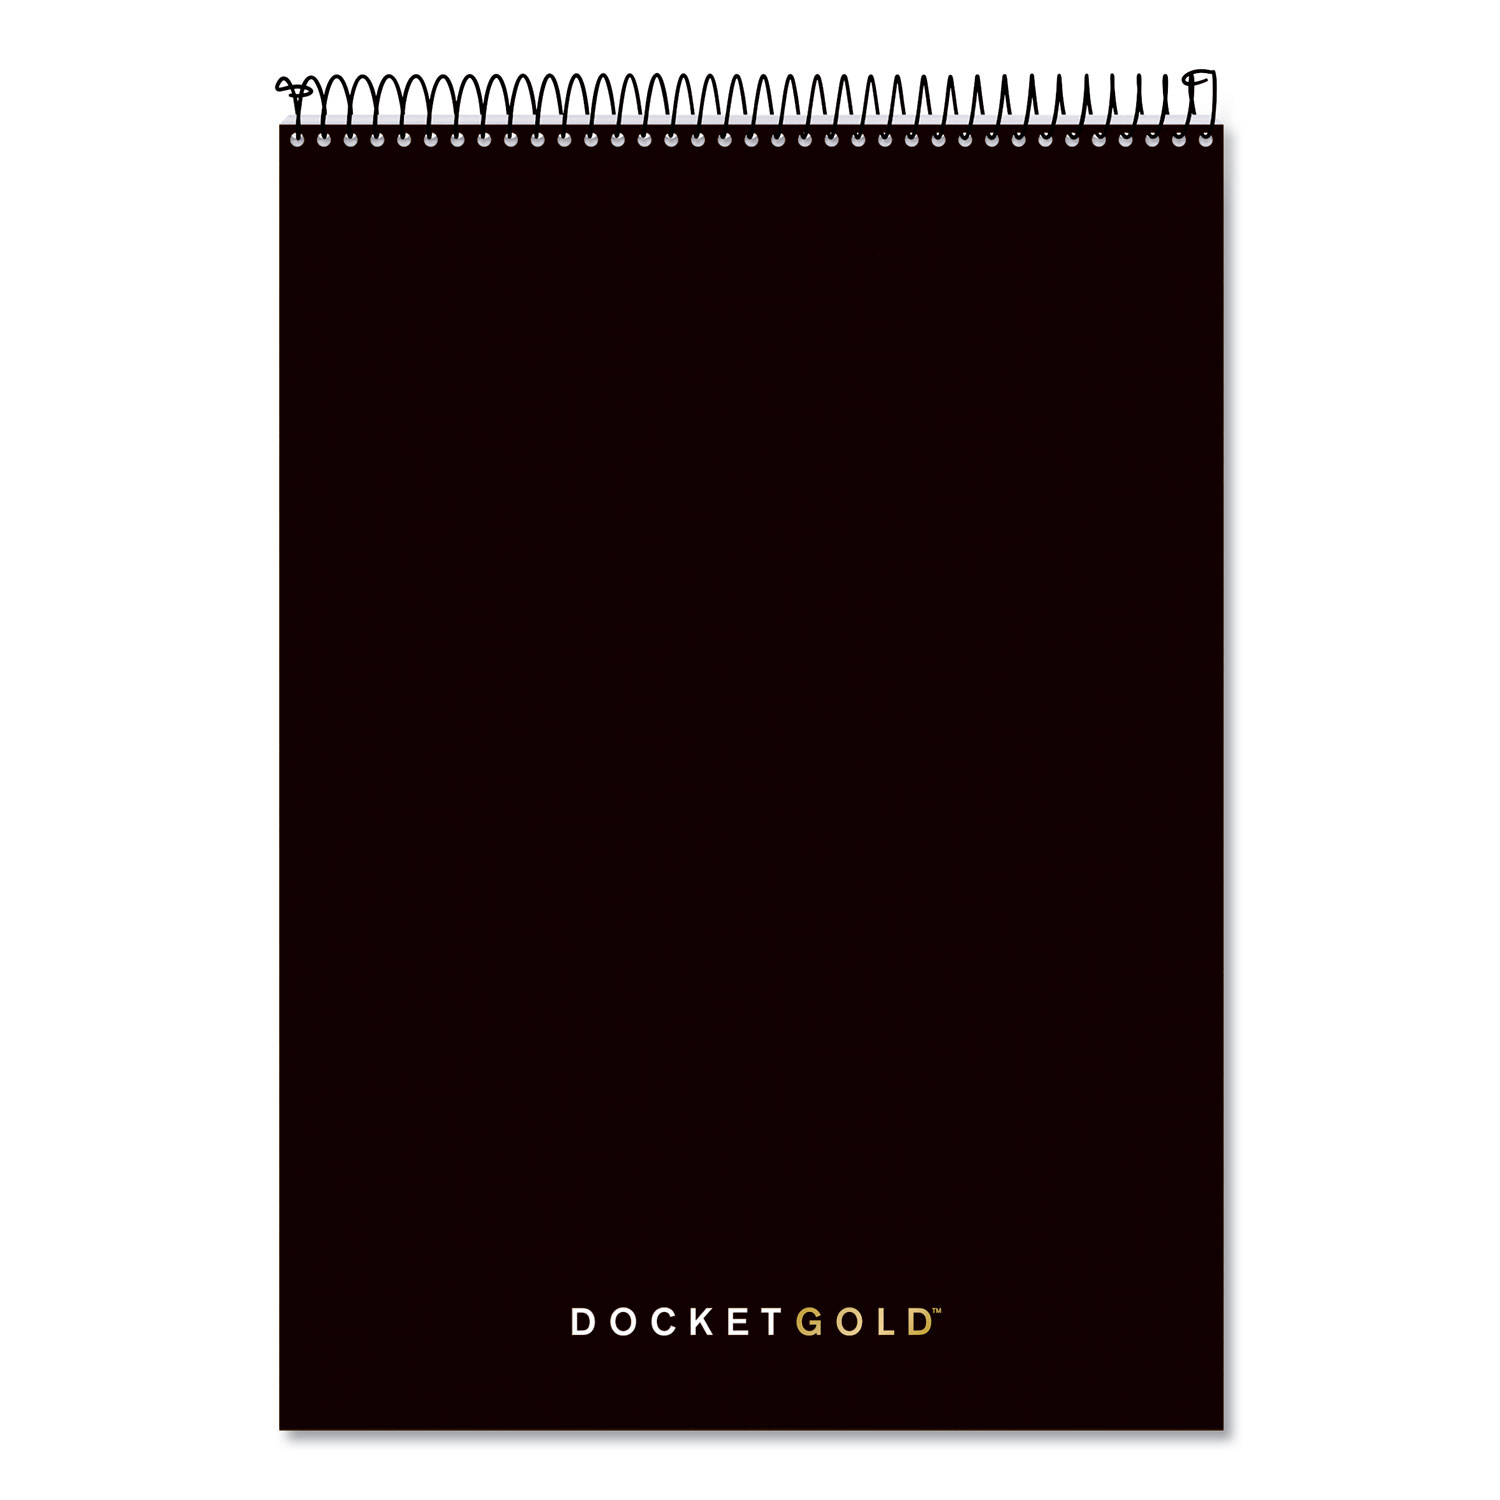  TOPS 63753 Docket Gold Planner & Project Planner, College, Black, 8.5 x 11.75, 70 Sheets (TOP63753) 